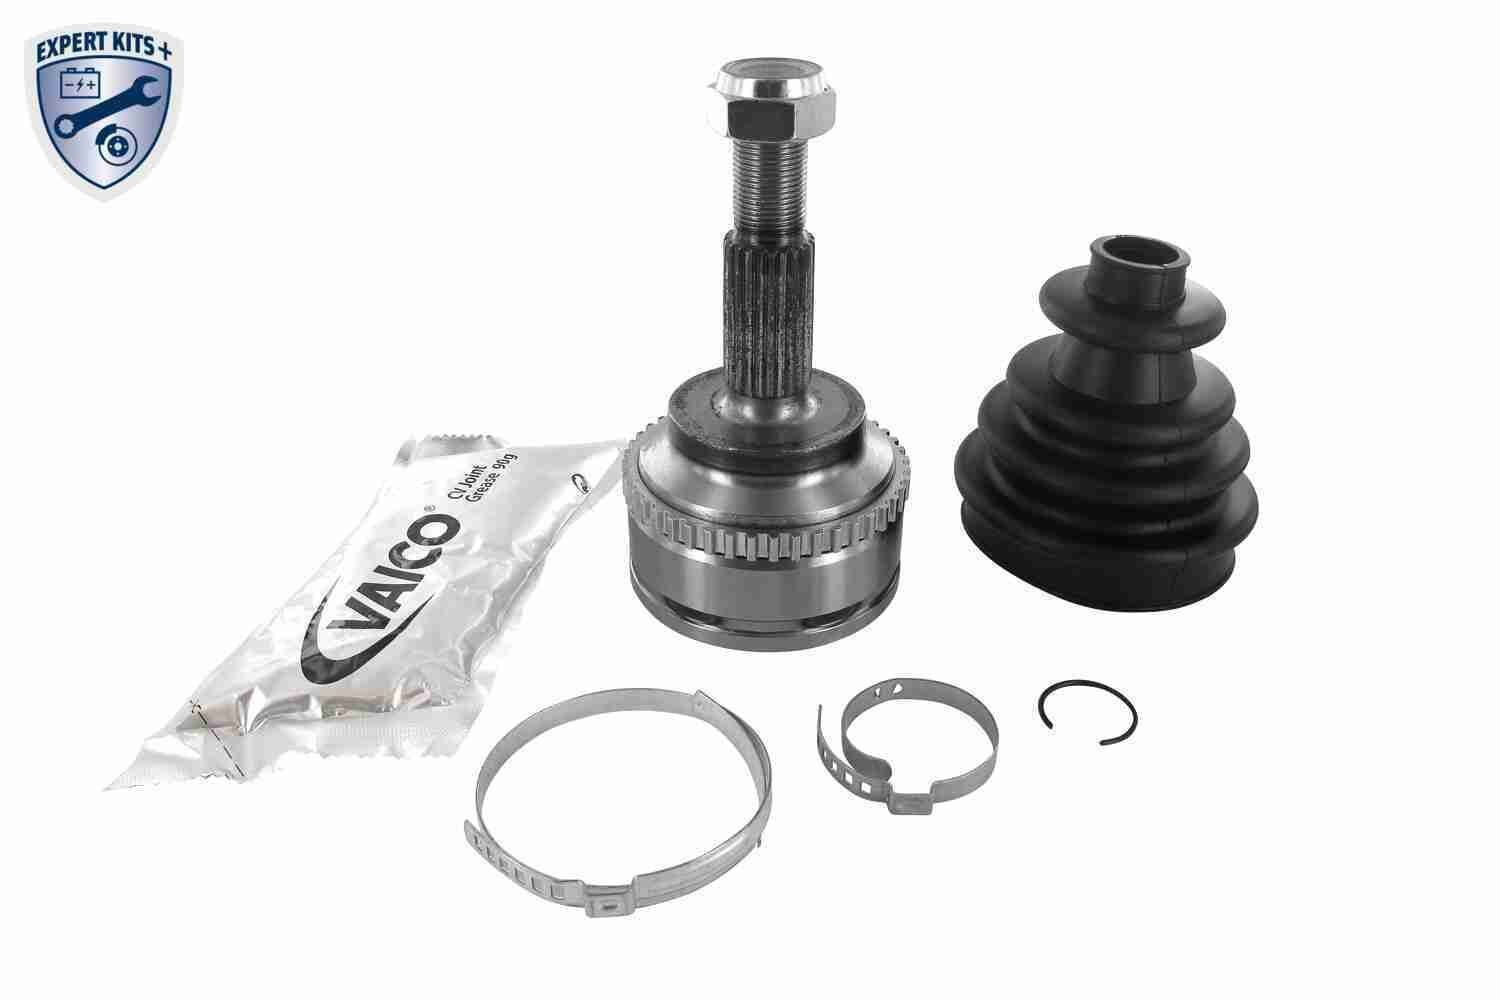 VAICO EXPERT KITS +, Wheel Side, with ABS ring External Toothing wheel side: 23, Internal Toothing wheel side: 30, Number of Teeth, ABS ring: 44 CV joint V46-0480 buy